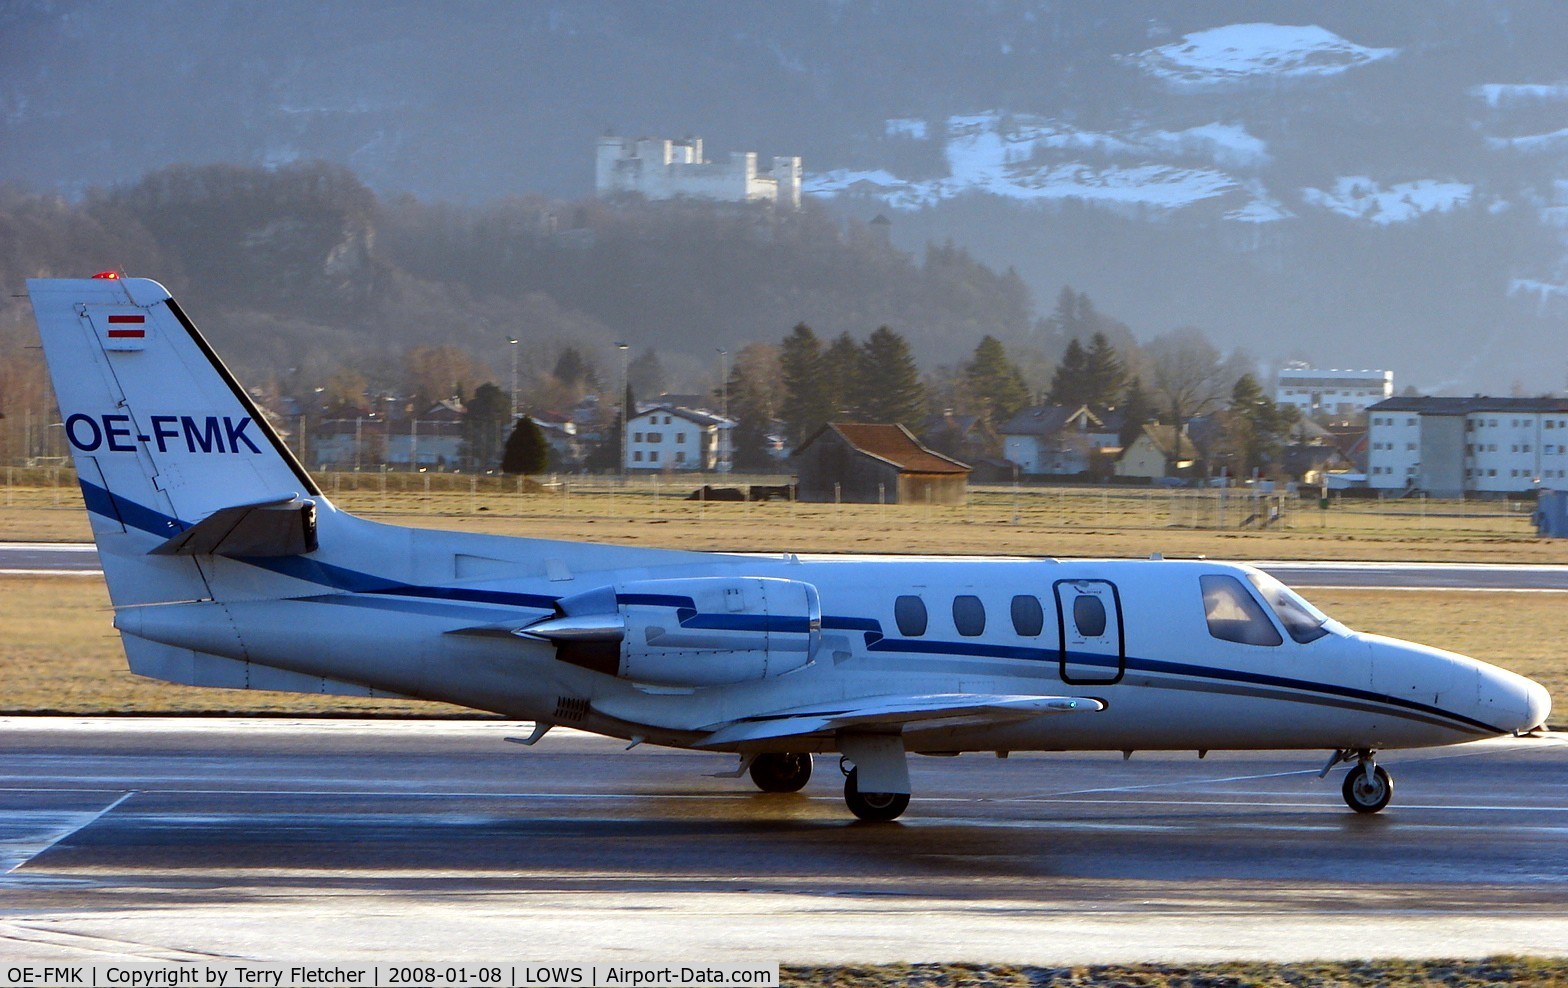 OE-FMK, 1980 Cessna 501 Citation I/SP C/N 501-0144, Cessna 501 taxies out against the backdrop of the ancient Salzburg Fortress